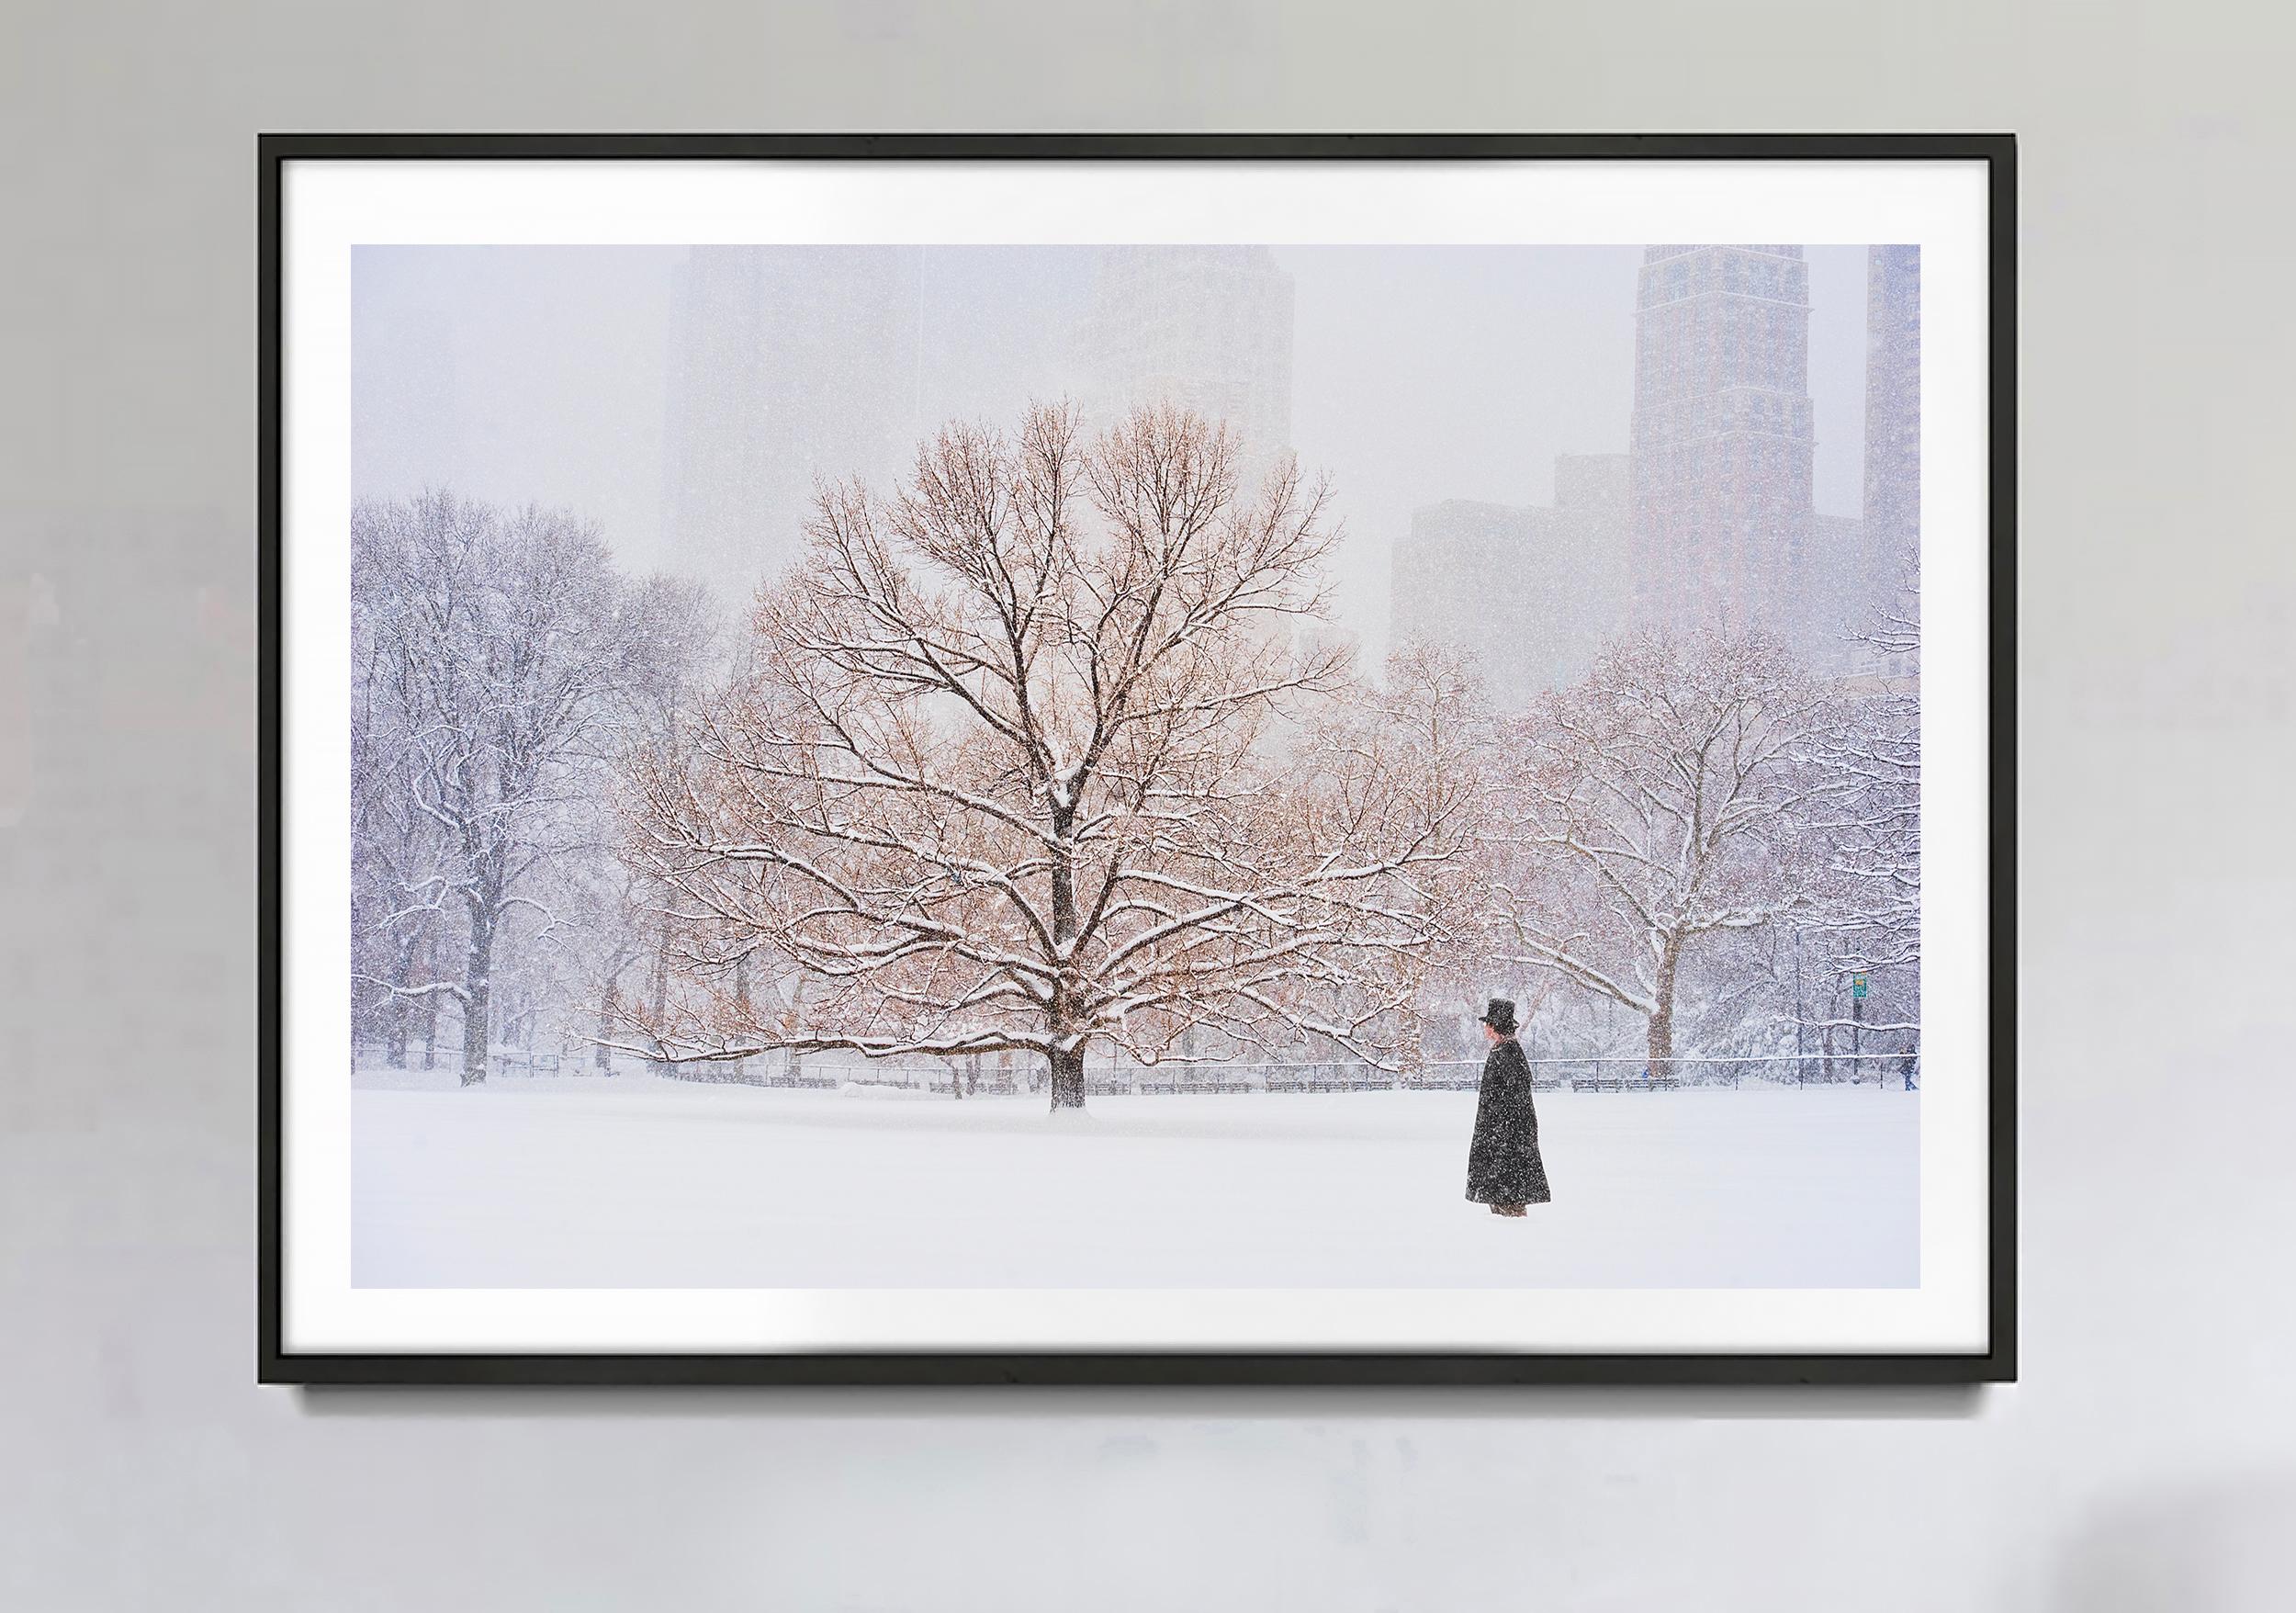 Man With Top Hat In Central Park During Snowstorm  - Photograph by Mitchell Funk